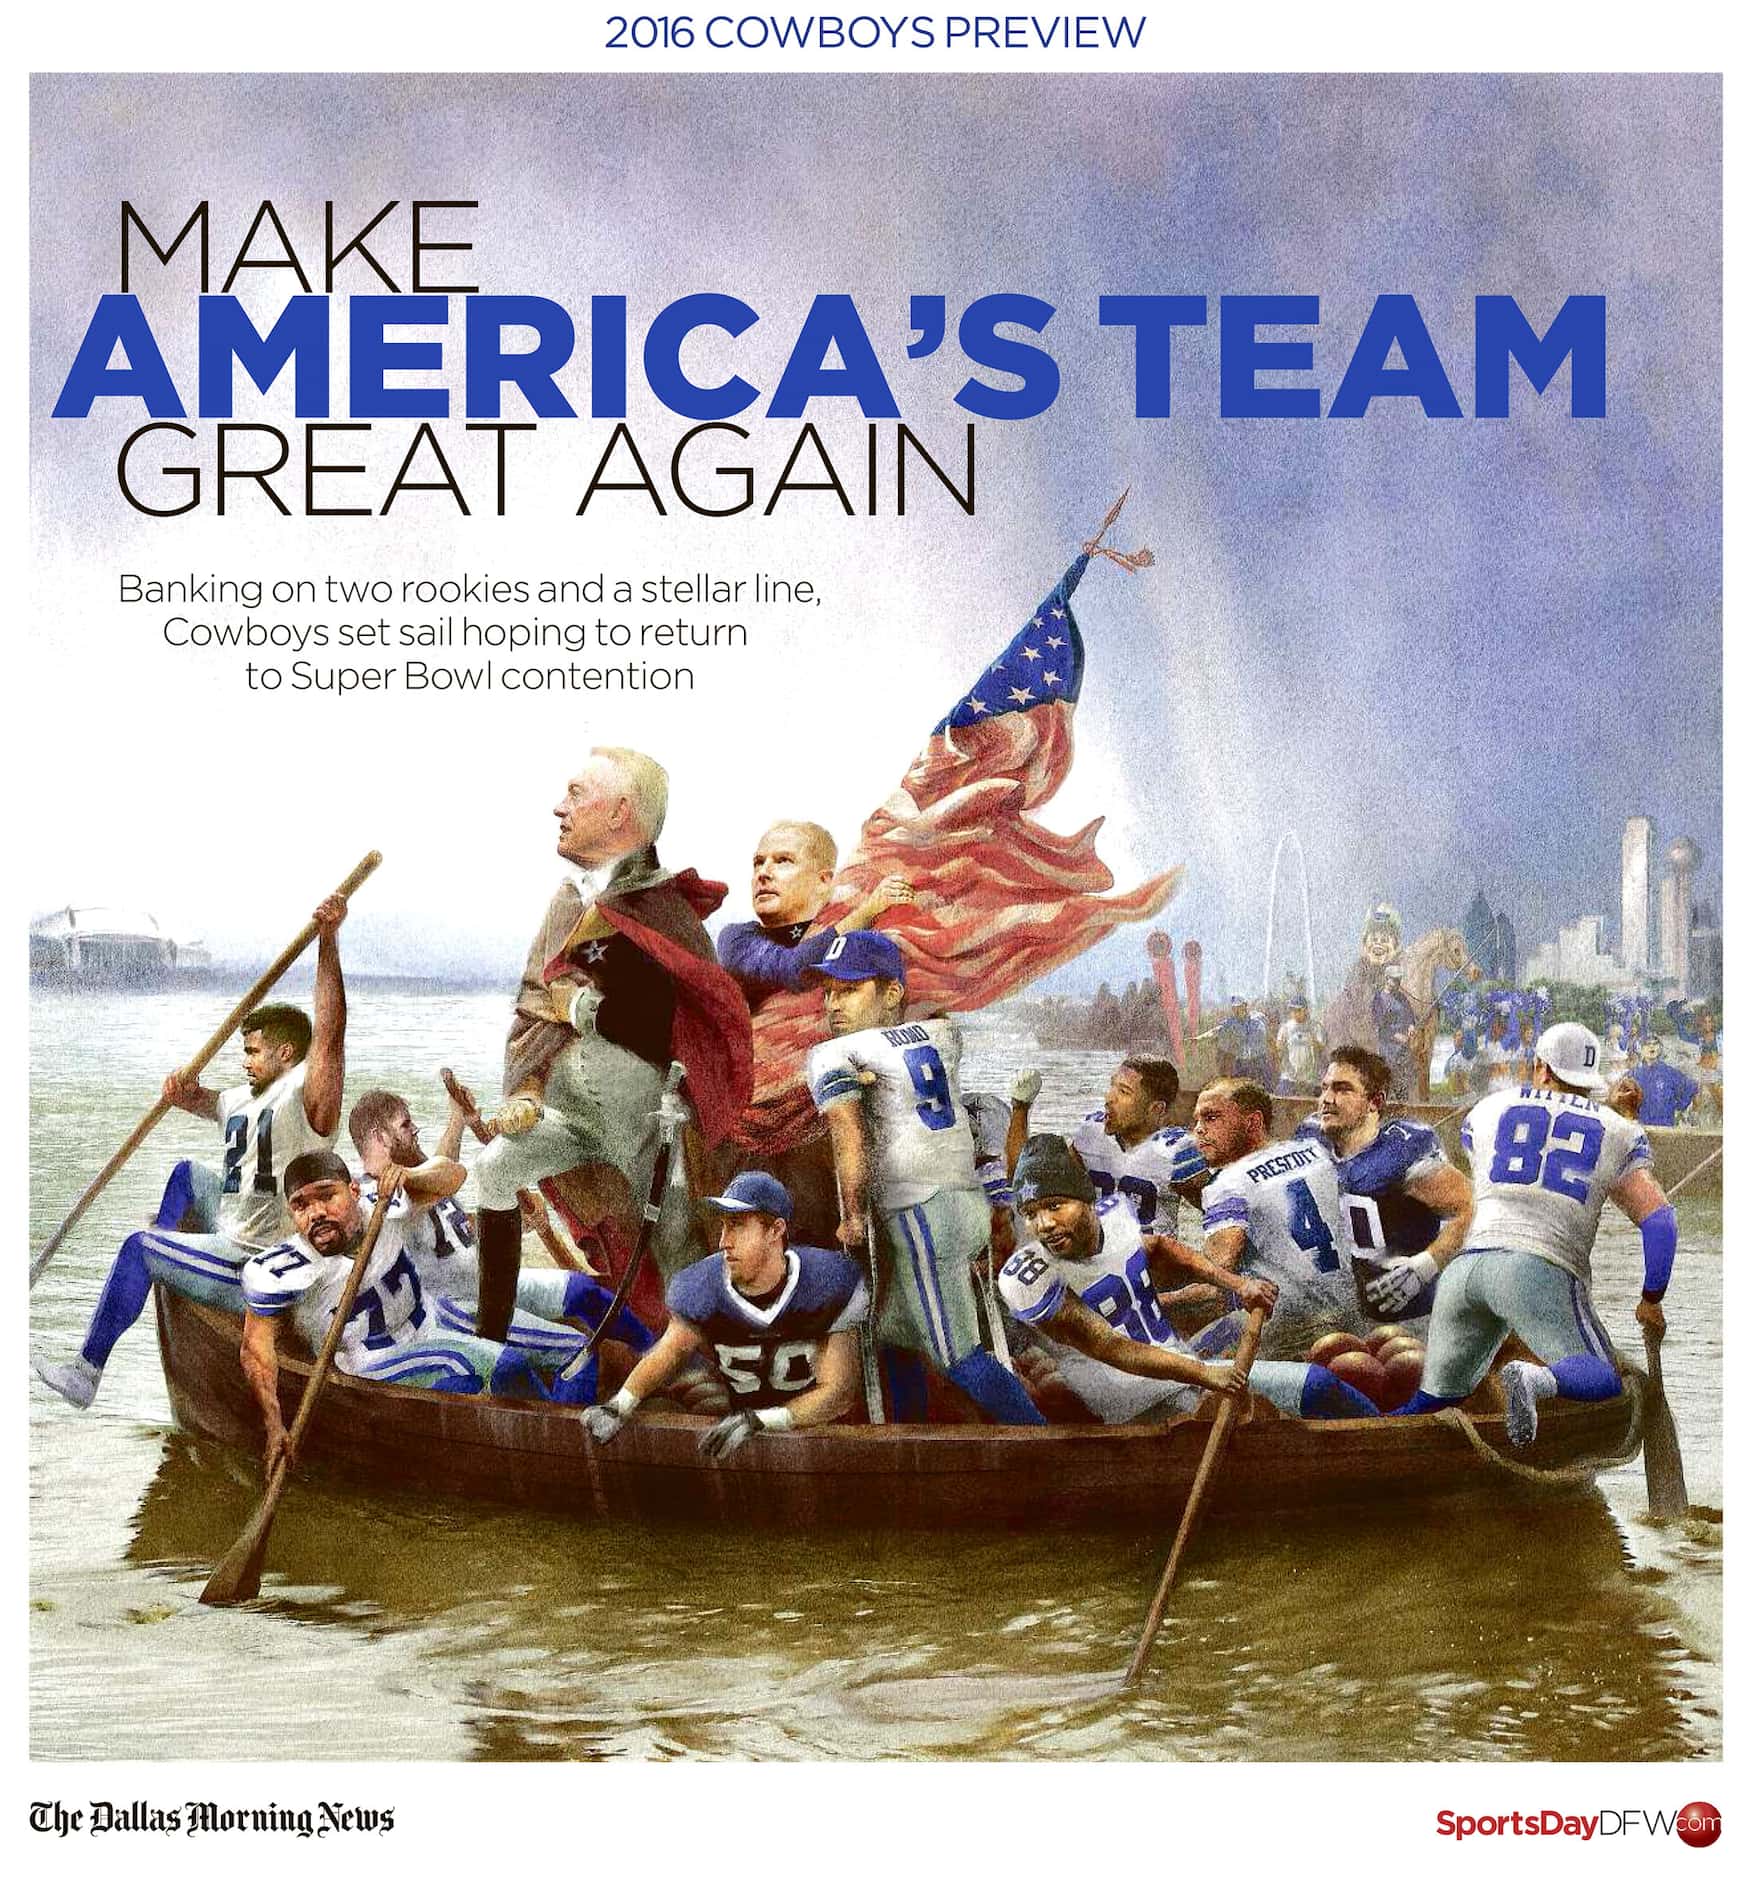 The cover of The Dallas Morning News' Cowboys preview section in 2016.